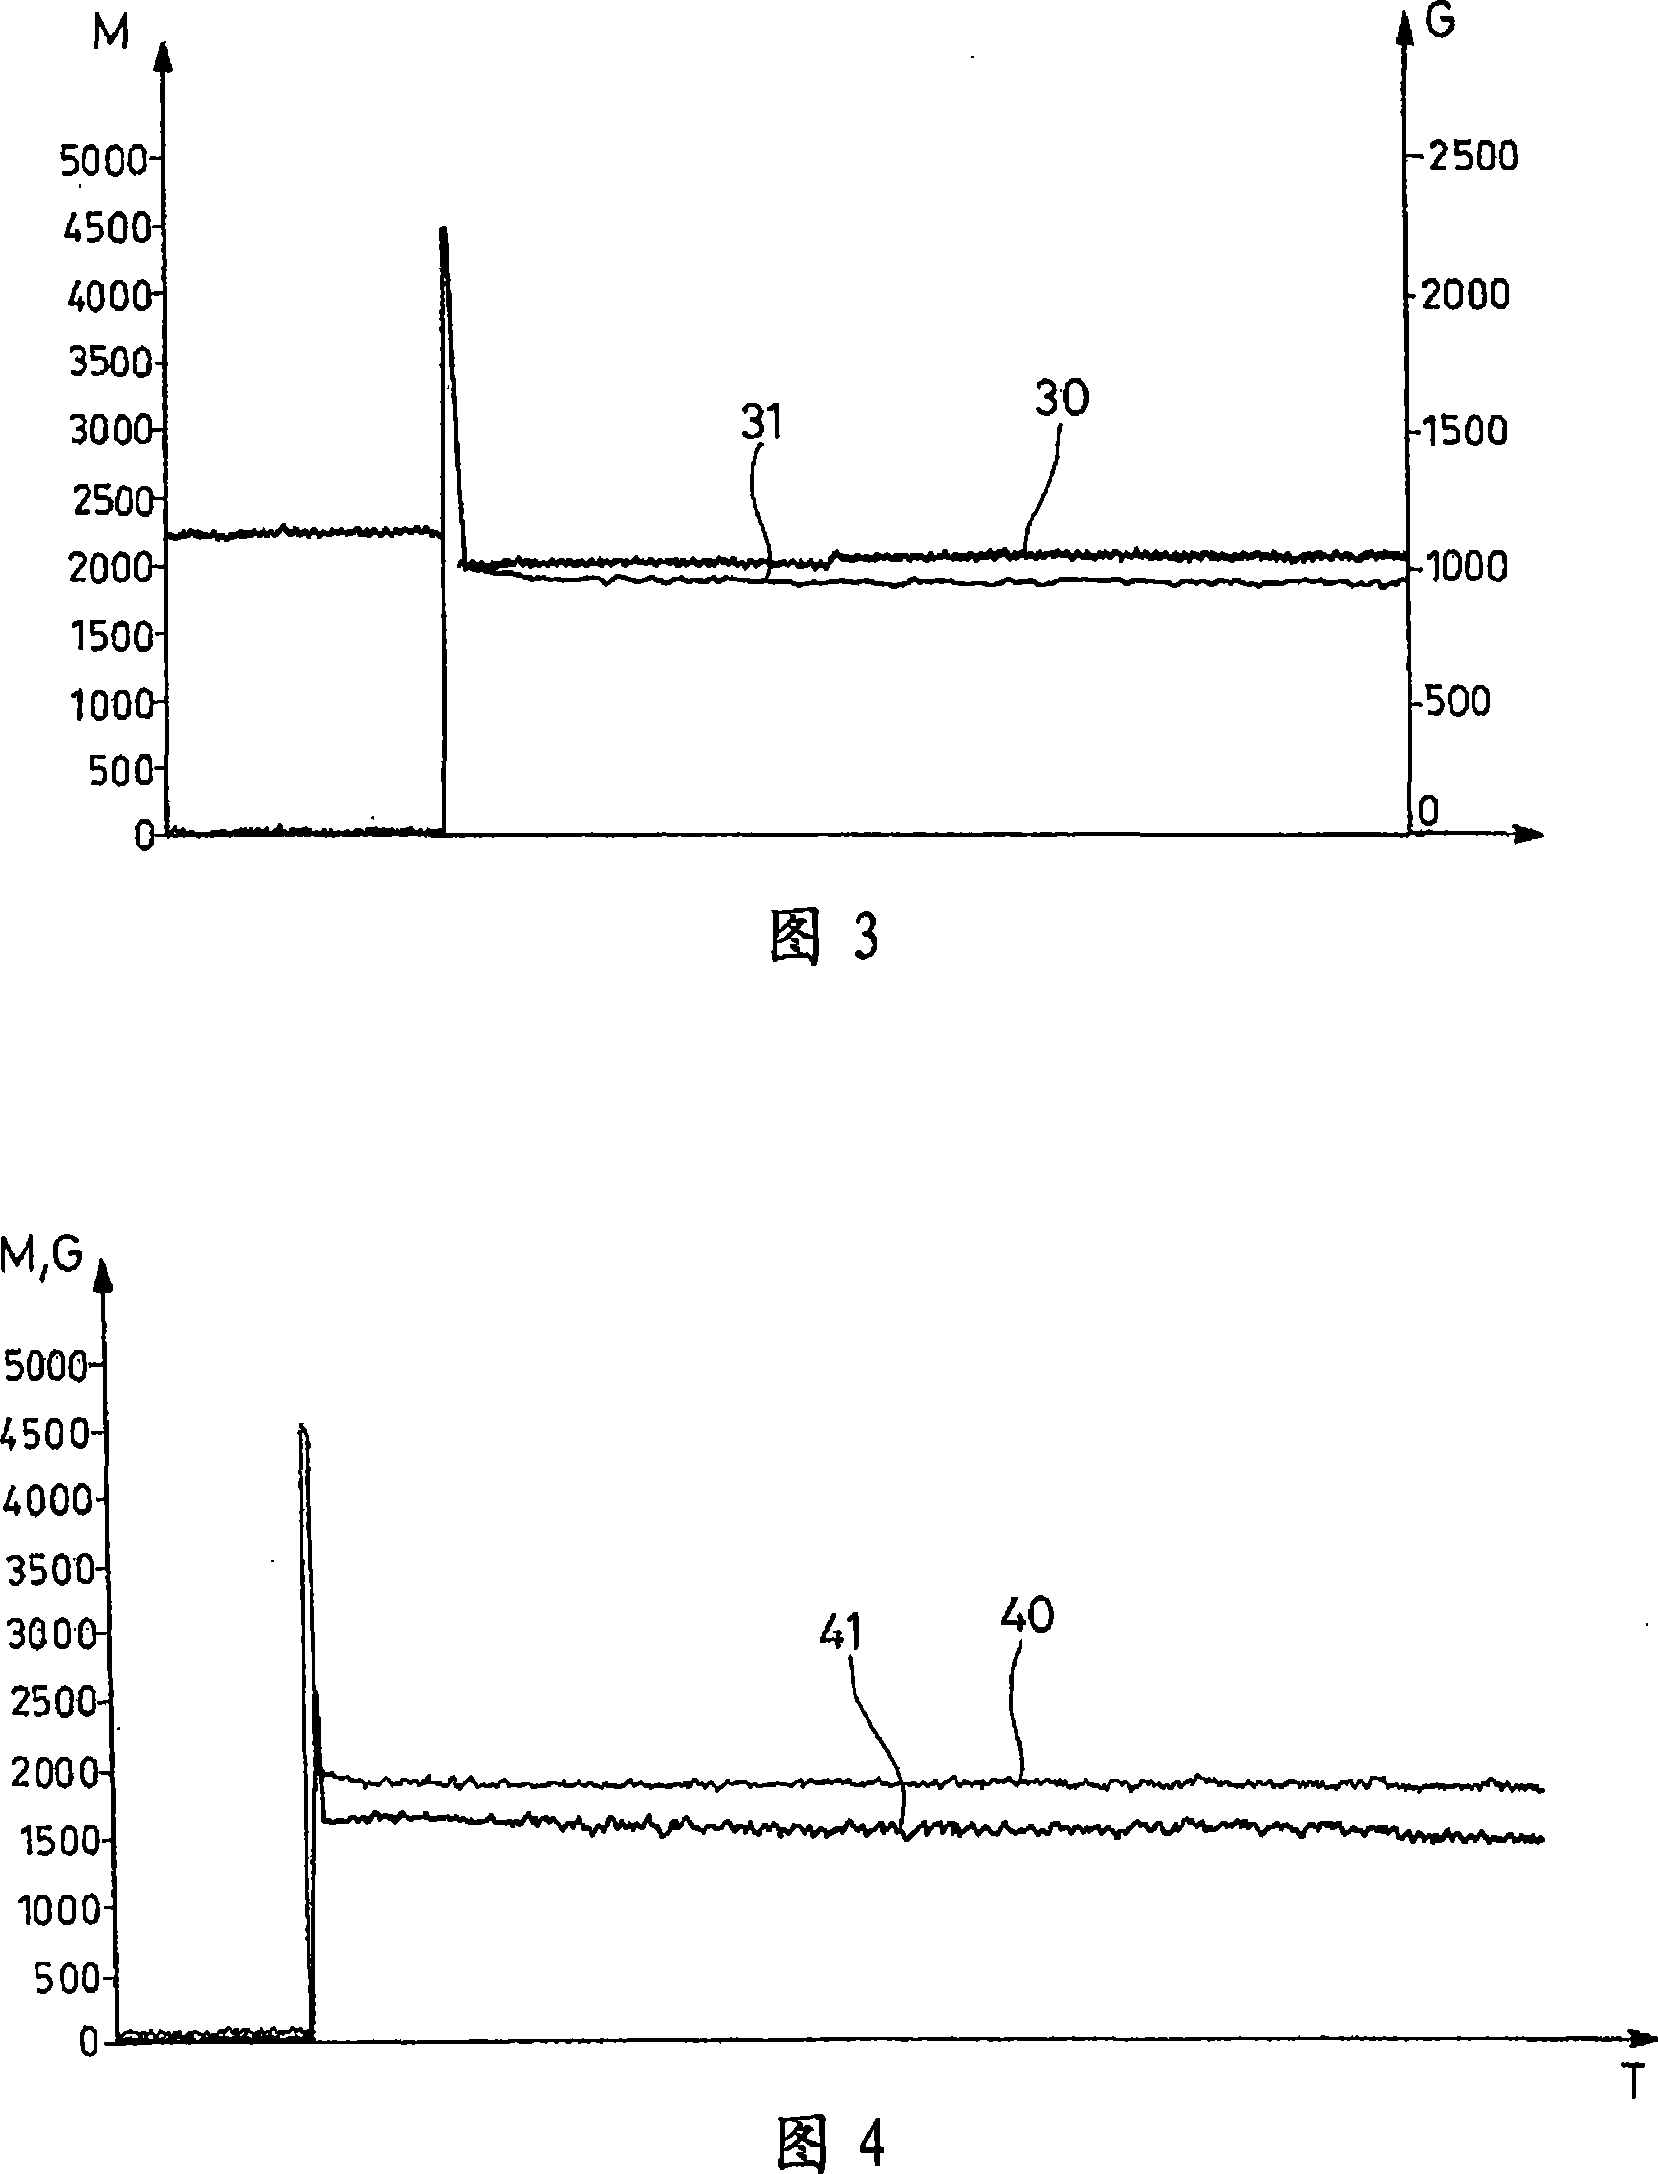 Vacuum line and method for monitoring same